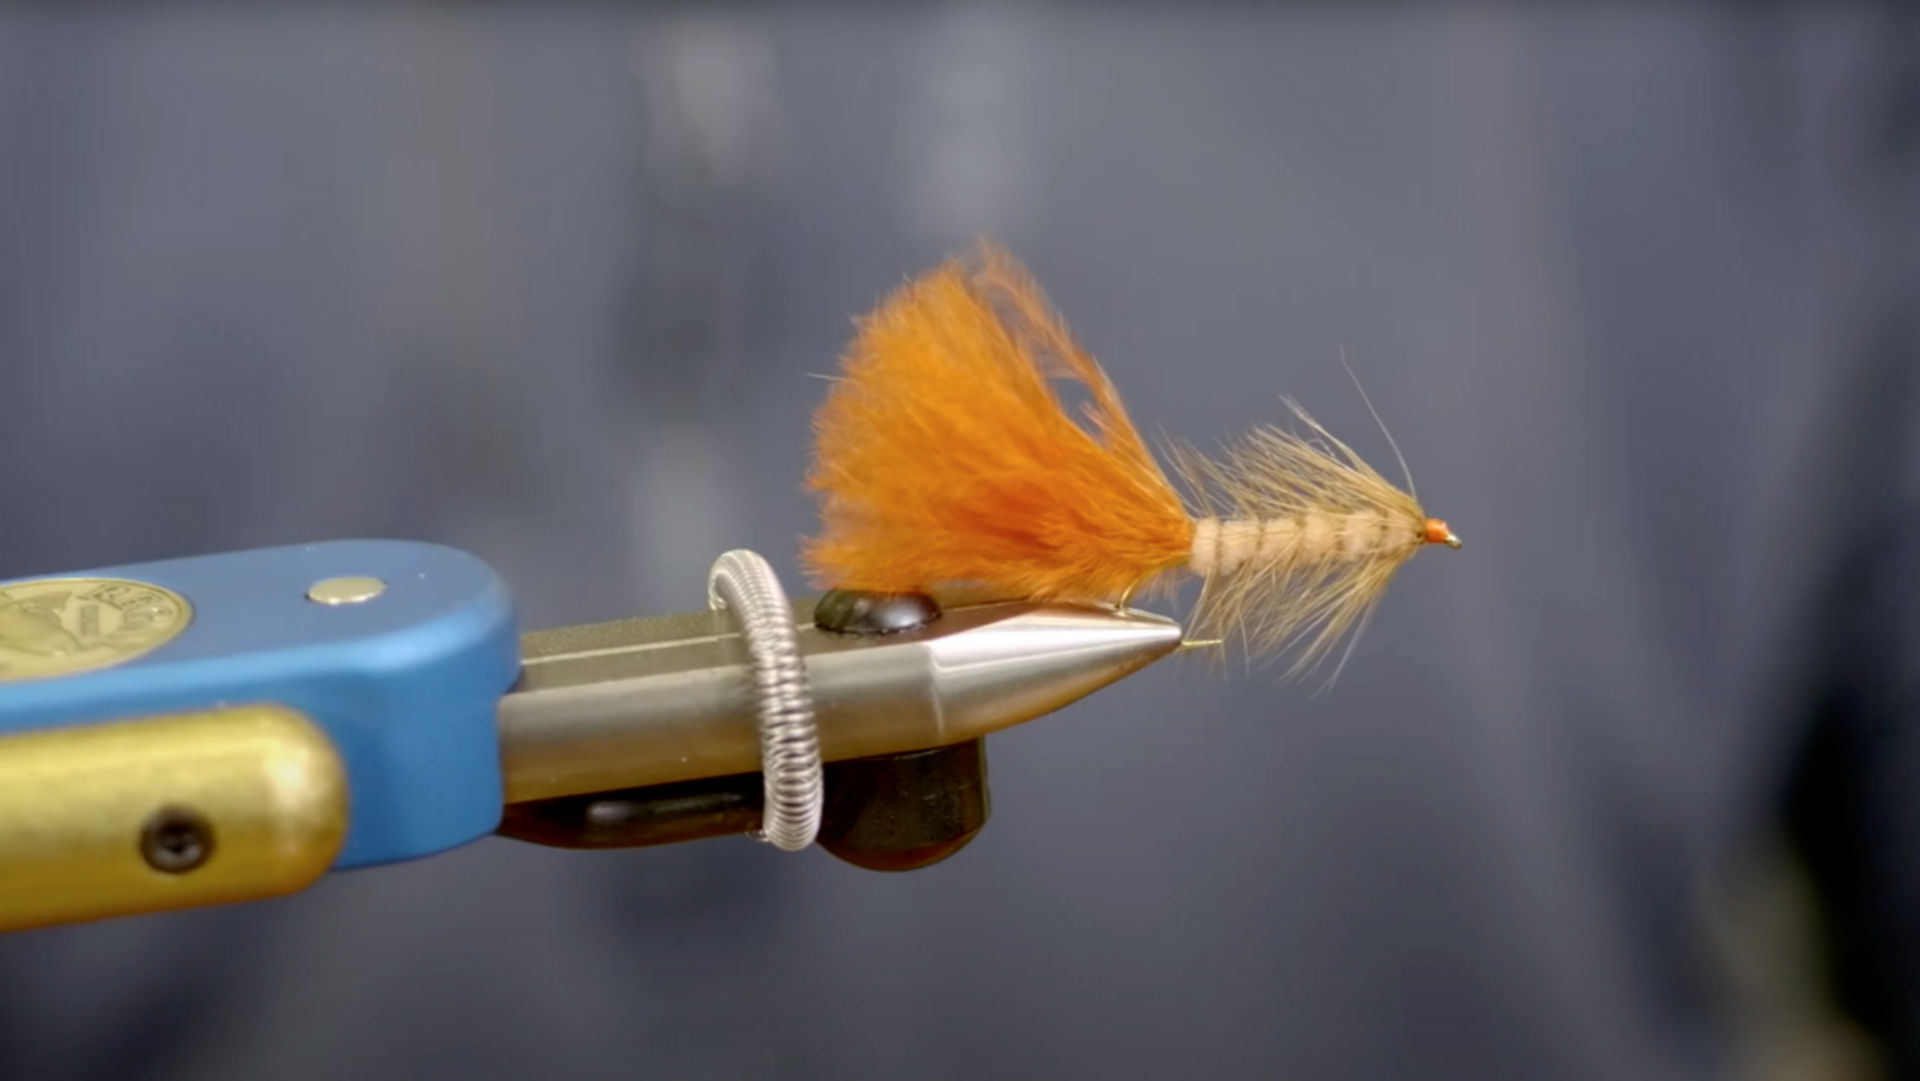 A close up of a fly-fishing fly held in pliers